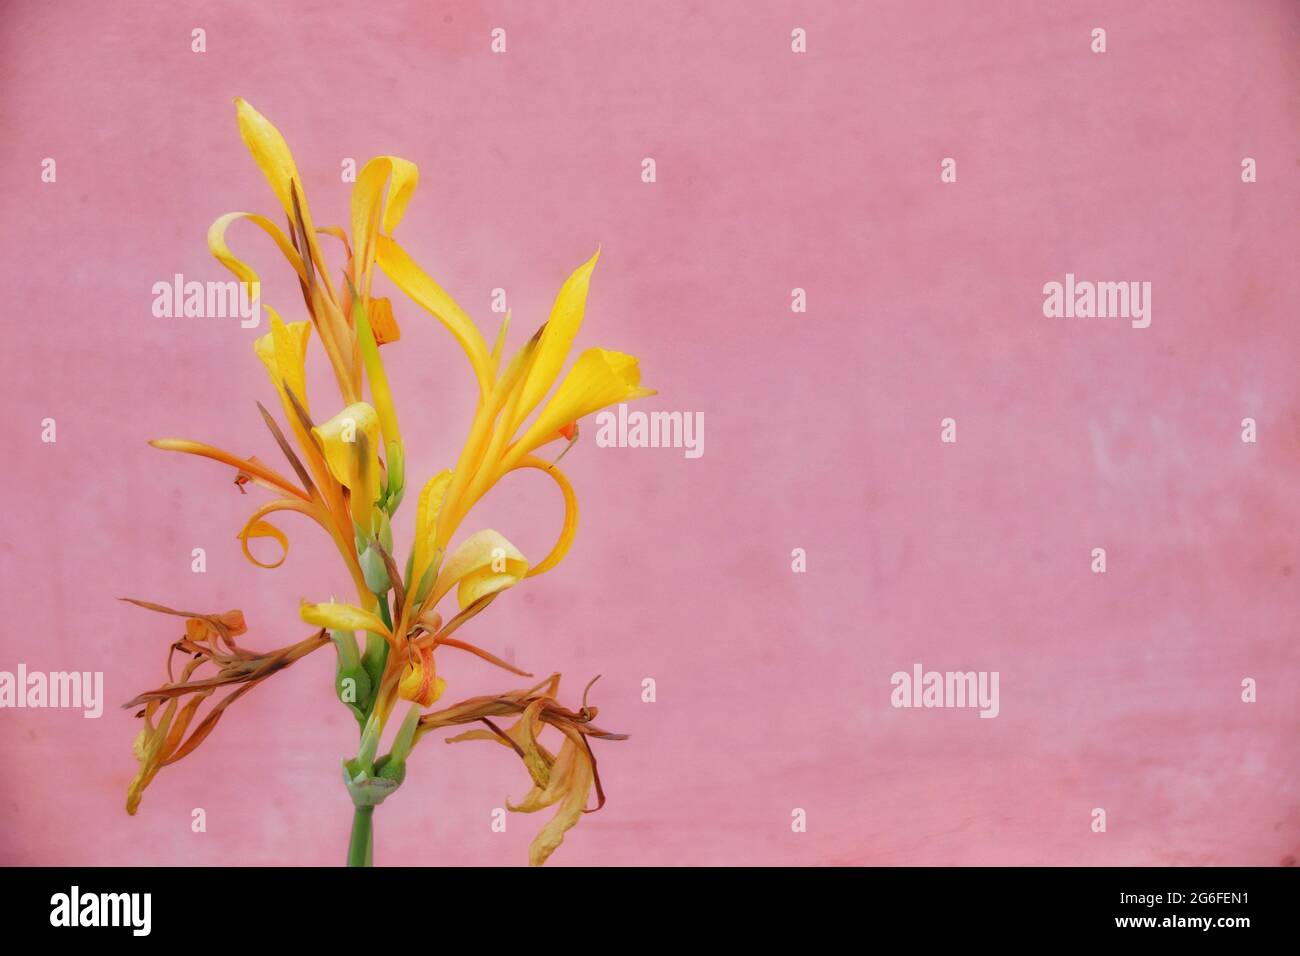 Close up of a yellow Canna Lily flower against a pink colored background Stock Photo